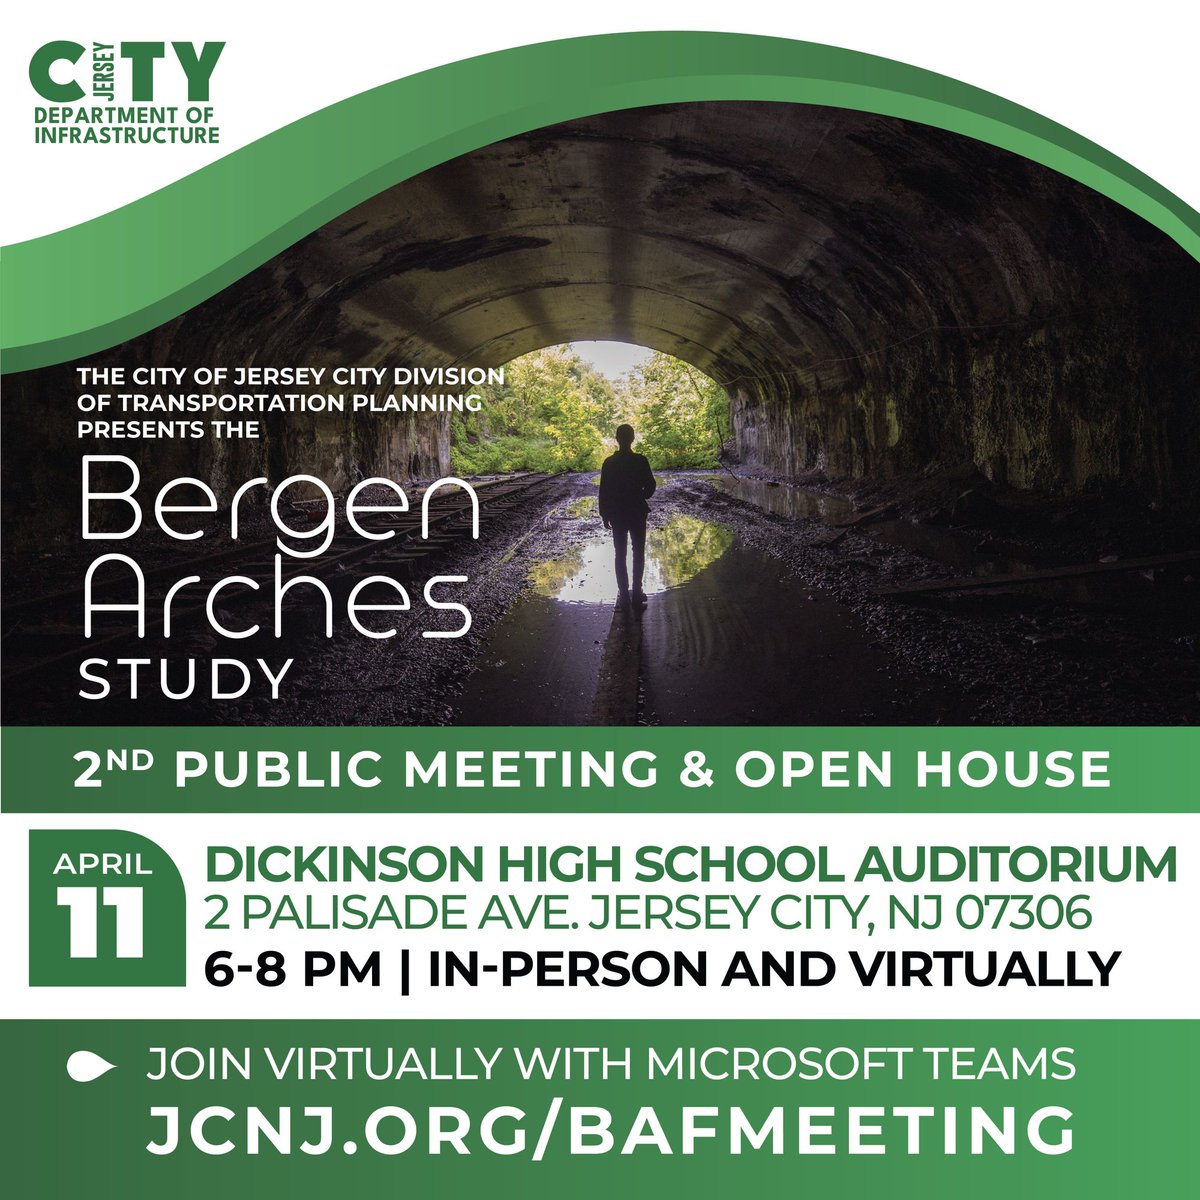 Come to the Bergen Arches Study Public Meeting and Open House and learn about the Bergen Arches Study and how to get involved! There will be activities for kids! Drop by and stay as long as you like, 6-8pm. Jcnj.org/BAFmeeting For more info: jcnj.org/bergenarches